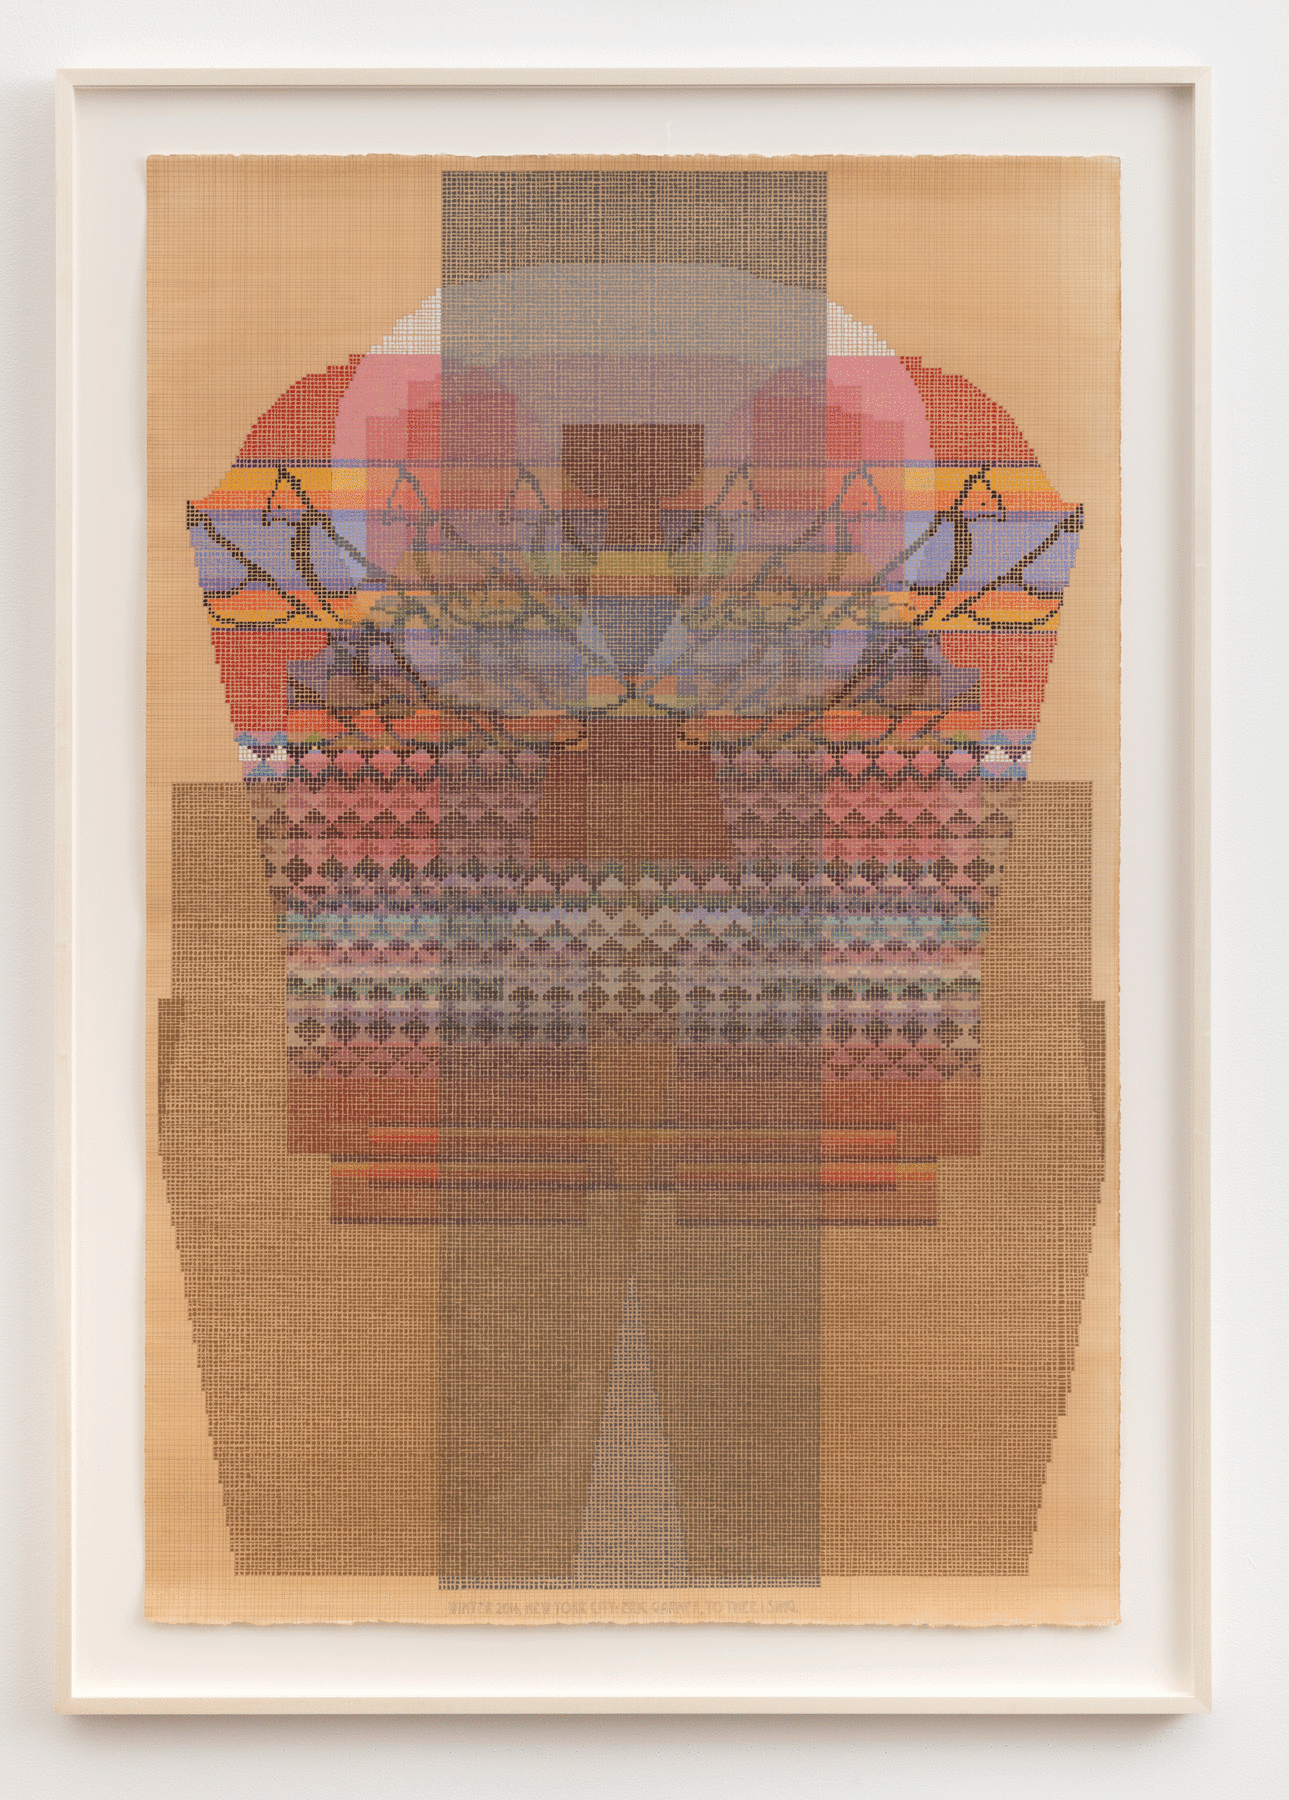 Winter 2014, New York City: Eric Garner, to Thee I Sing, 2021, gouache and graphite on tea-stained paper